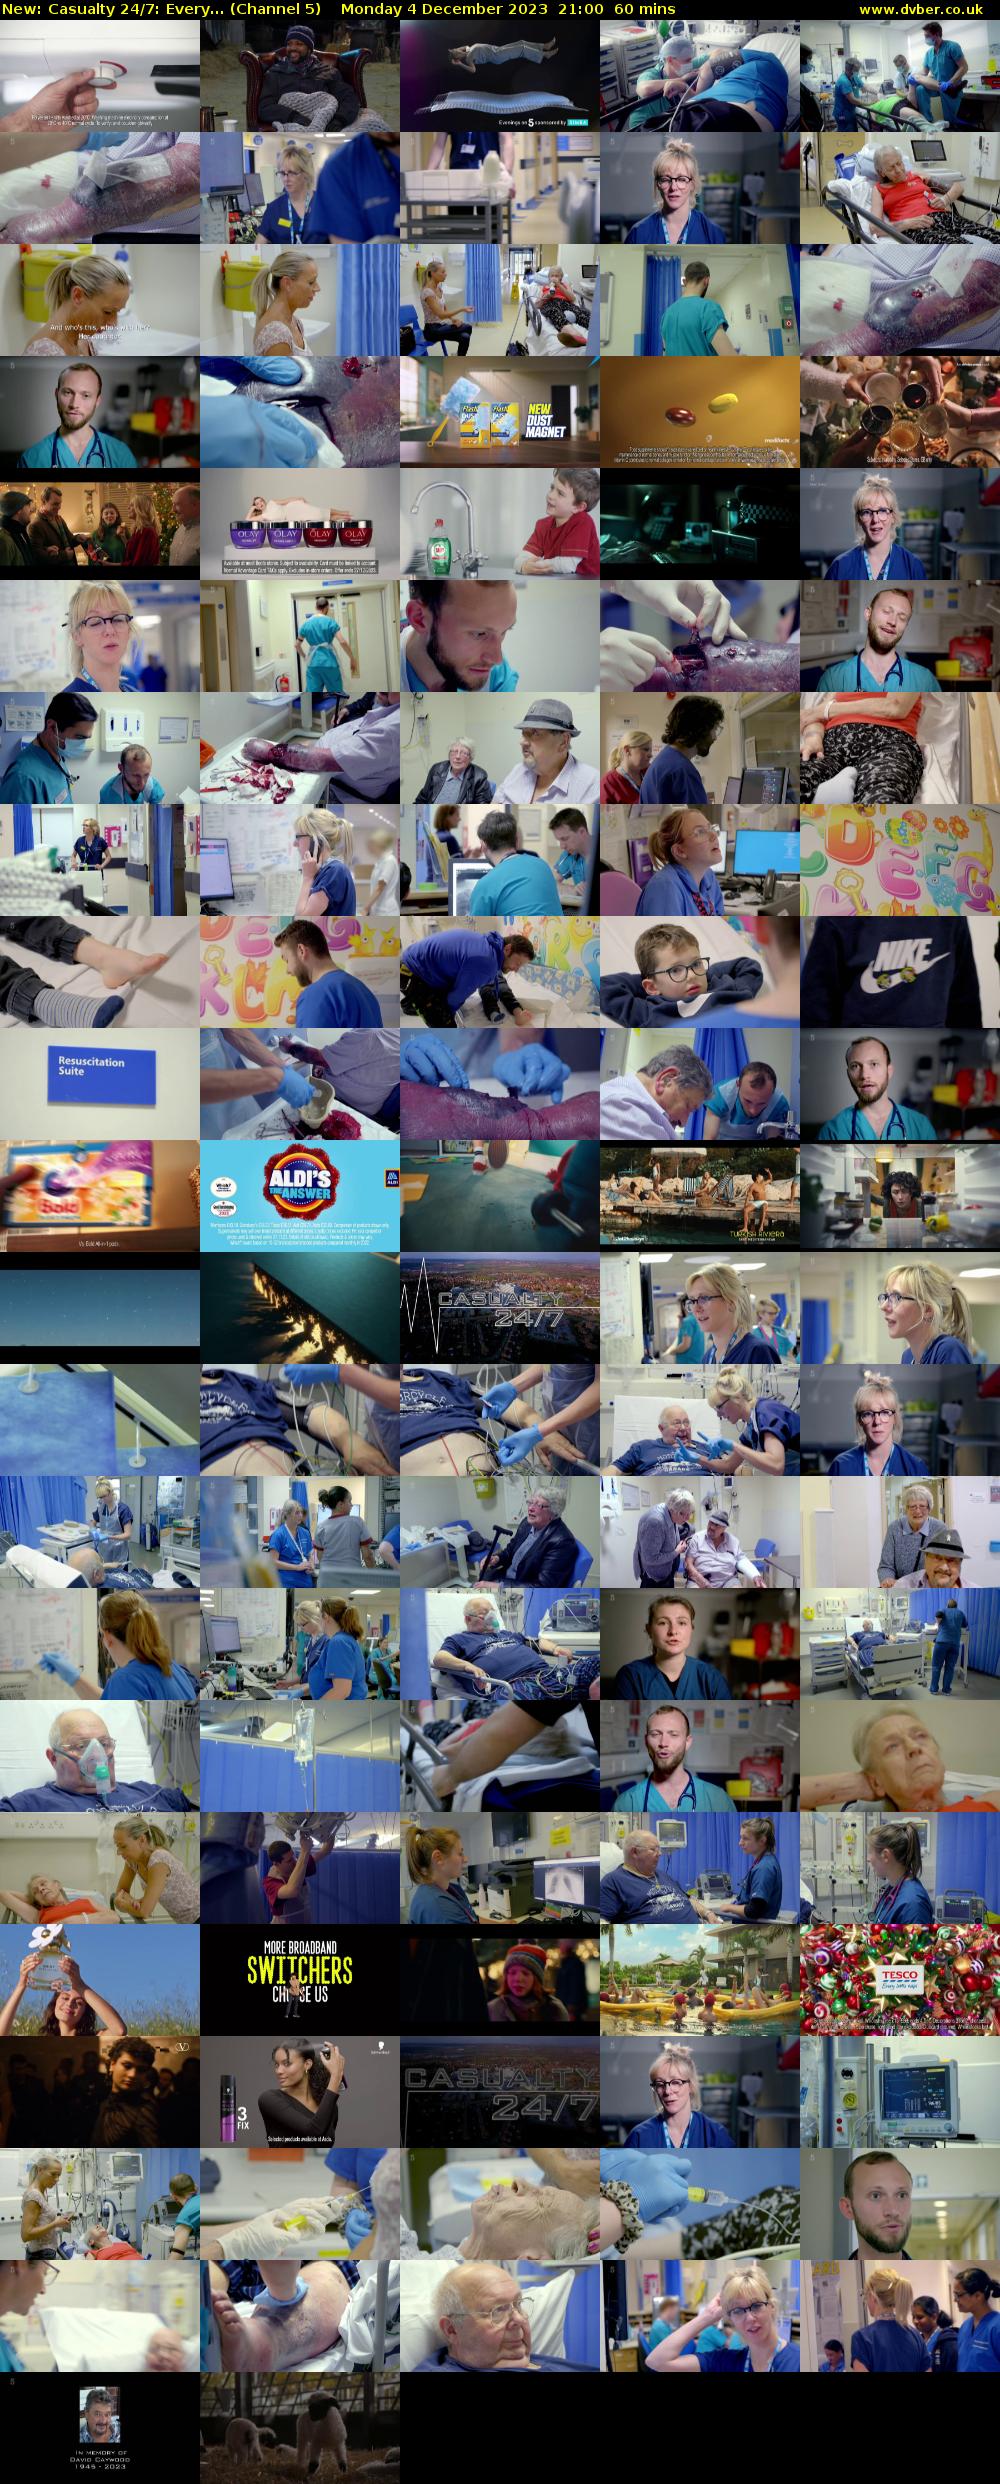 Casualty 24/7: Every... (Channel 5) Monday 4 December 2023 21:00 - 22:00